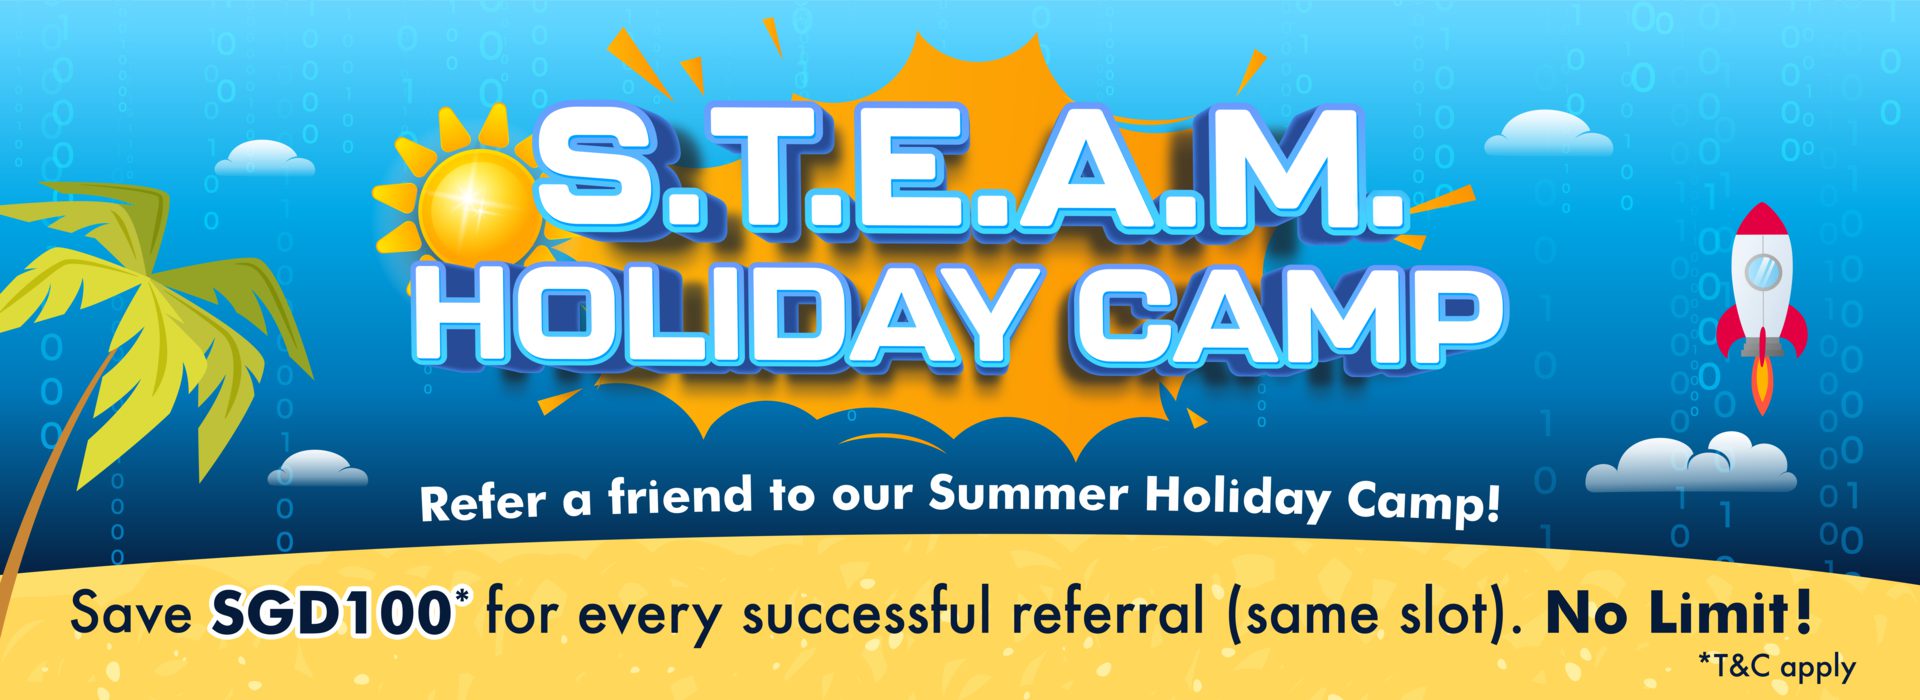 S.T.E.A.M. Holiday Camp